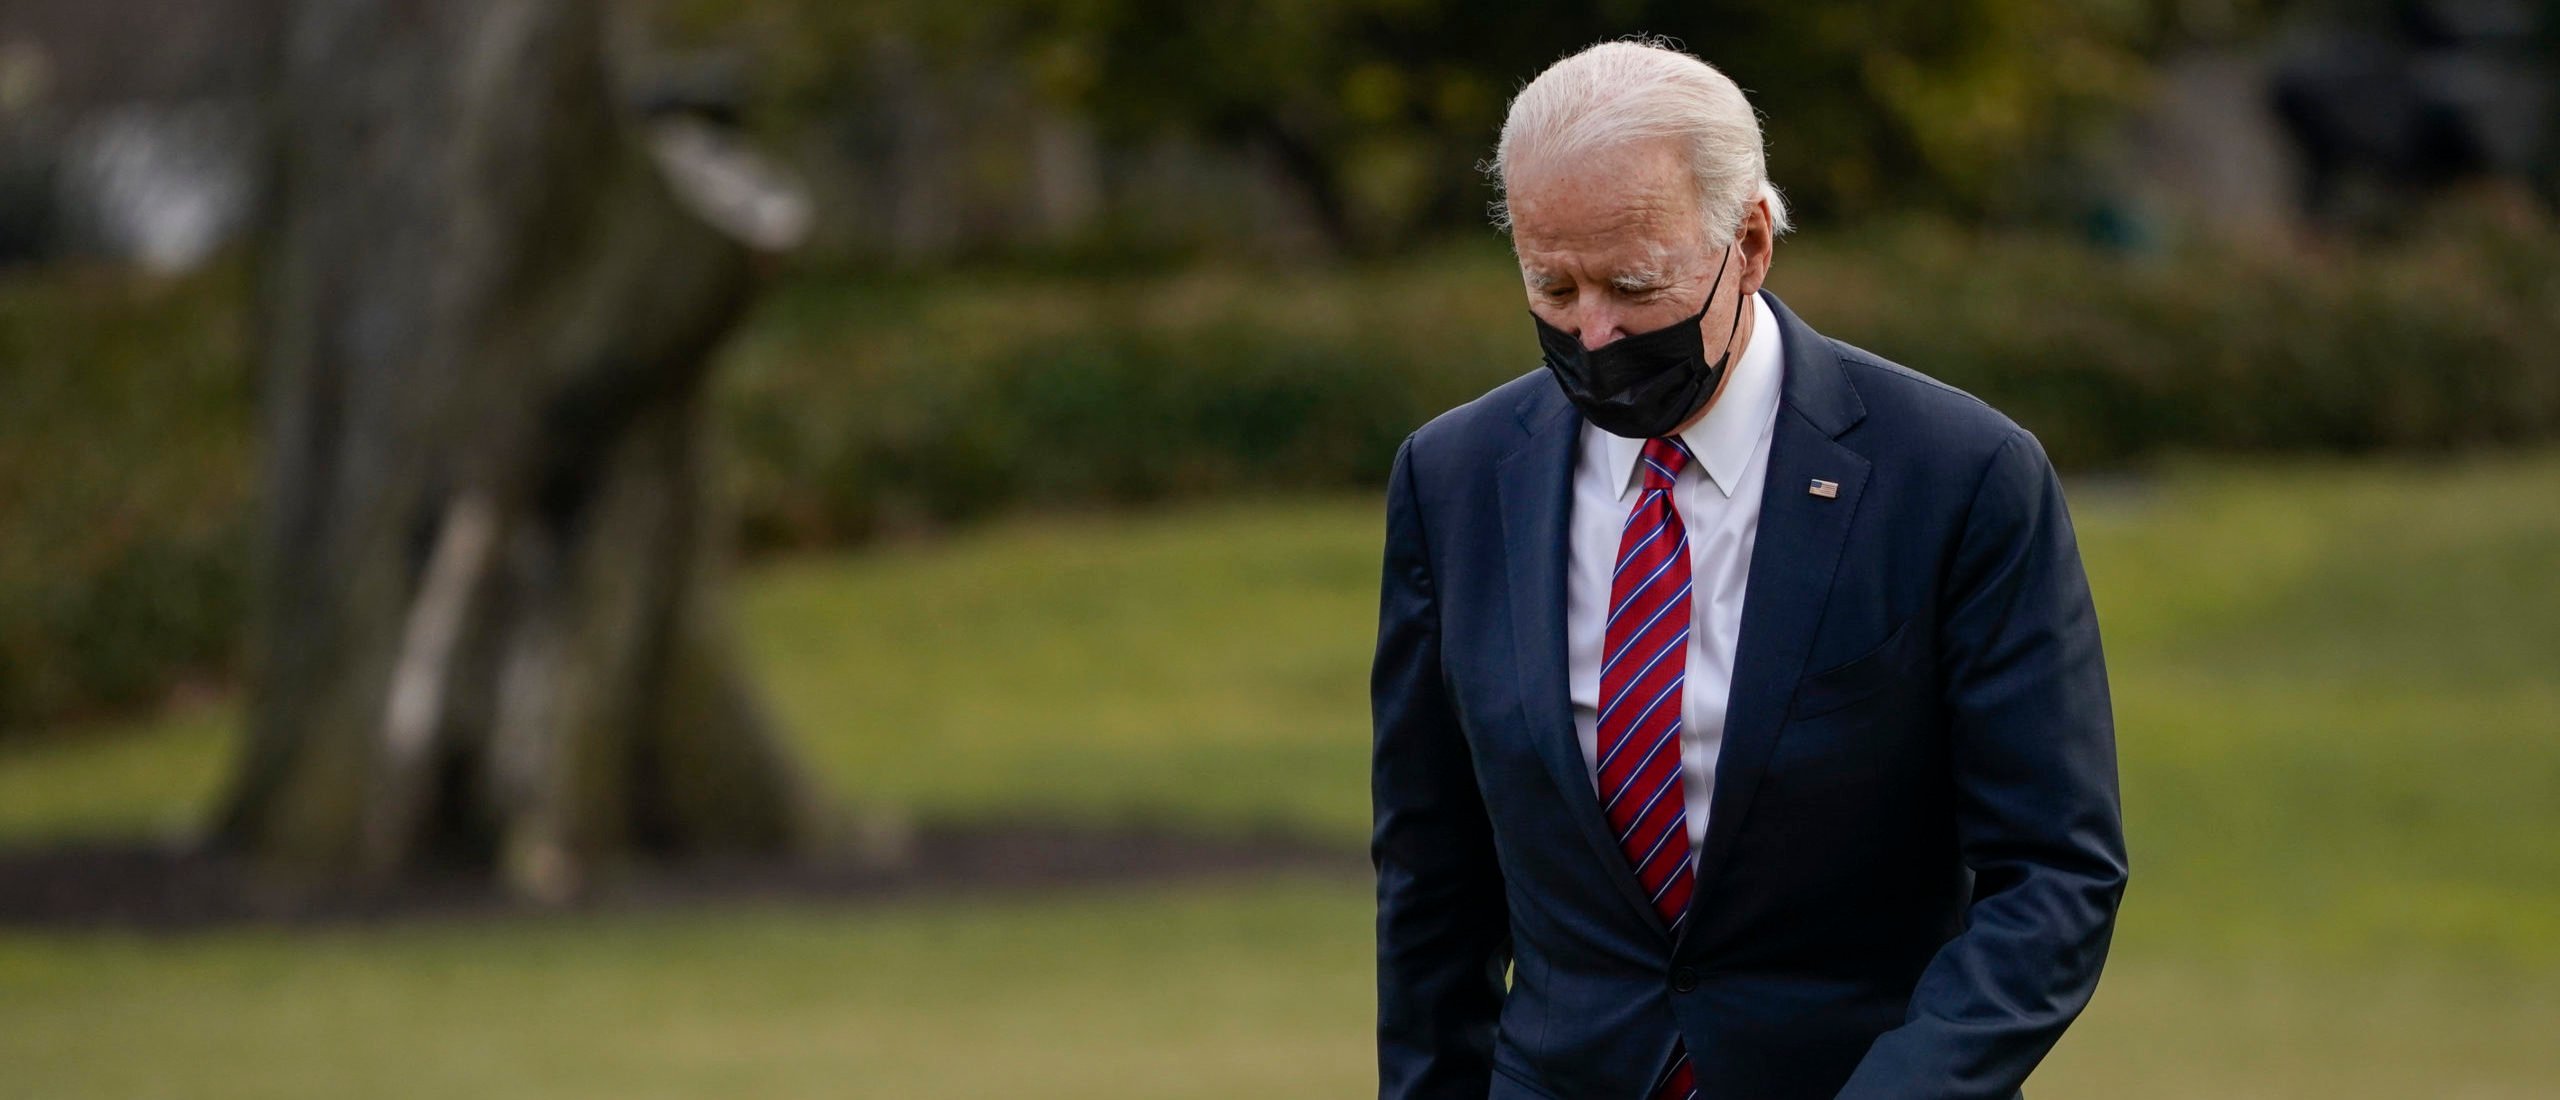 WASHINGTON, DC - JANUARY 29: U.S. President Joe Biden walks to the White House residence upon exiting Marine One on January 29, 2021 in Washington, DC. President Biden traveled to Walter Reed National Military Medical Center to visit with wounded service members. (Photo by Drew Angerer/Getty Images)